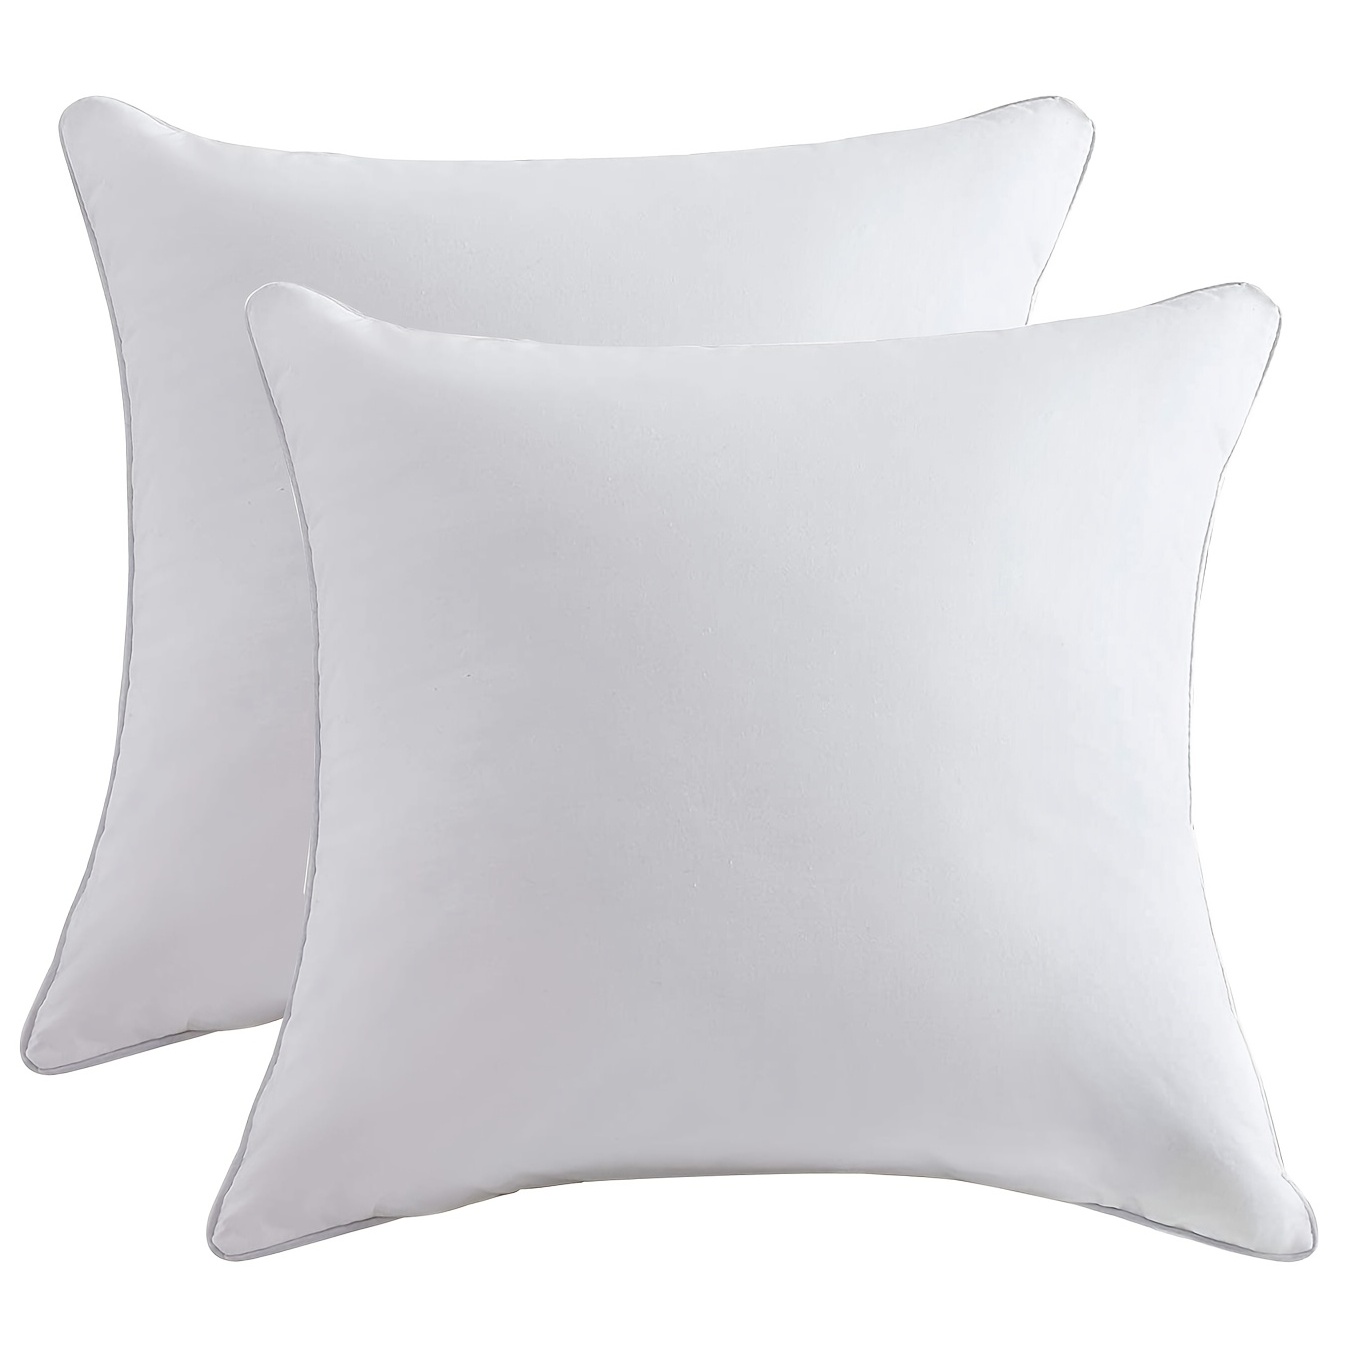 Throw Pillow Inserts-18x18 Inches Decorative Pillows Inserts Set of 2 White